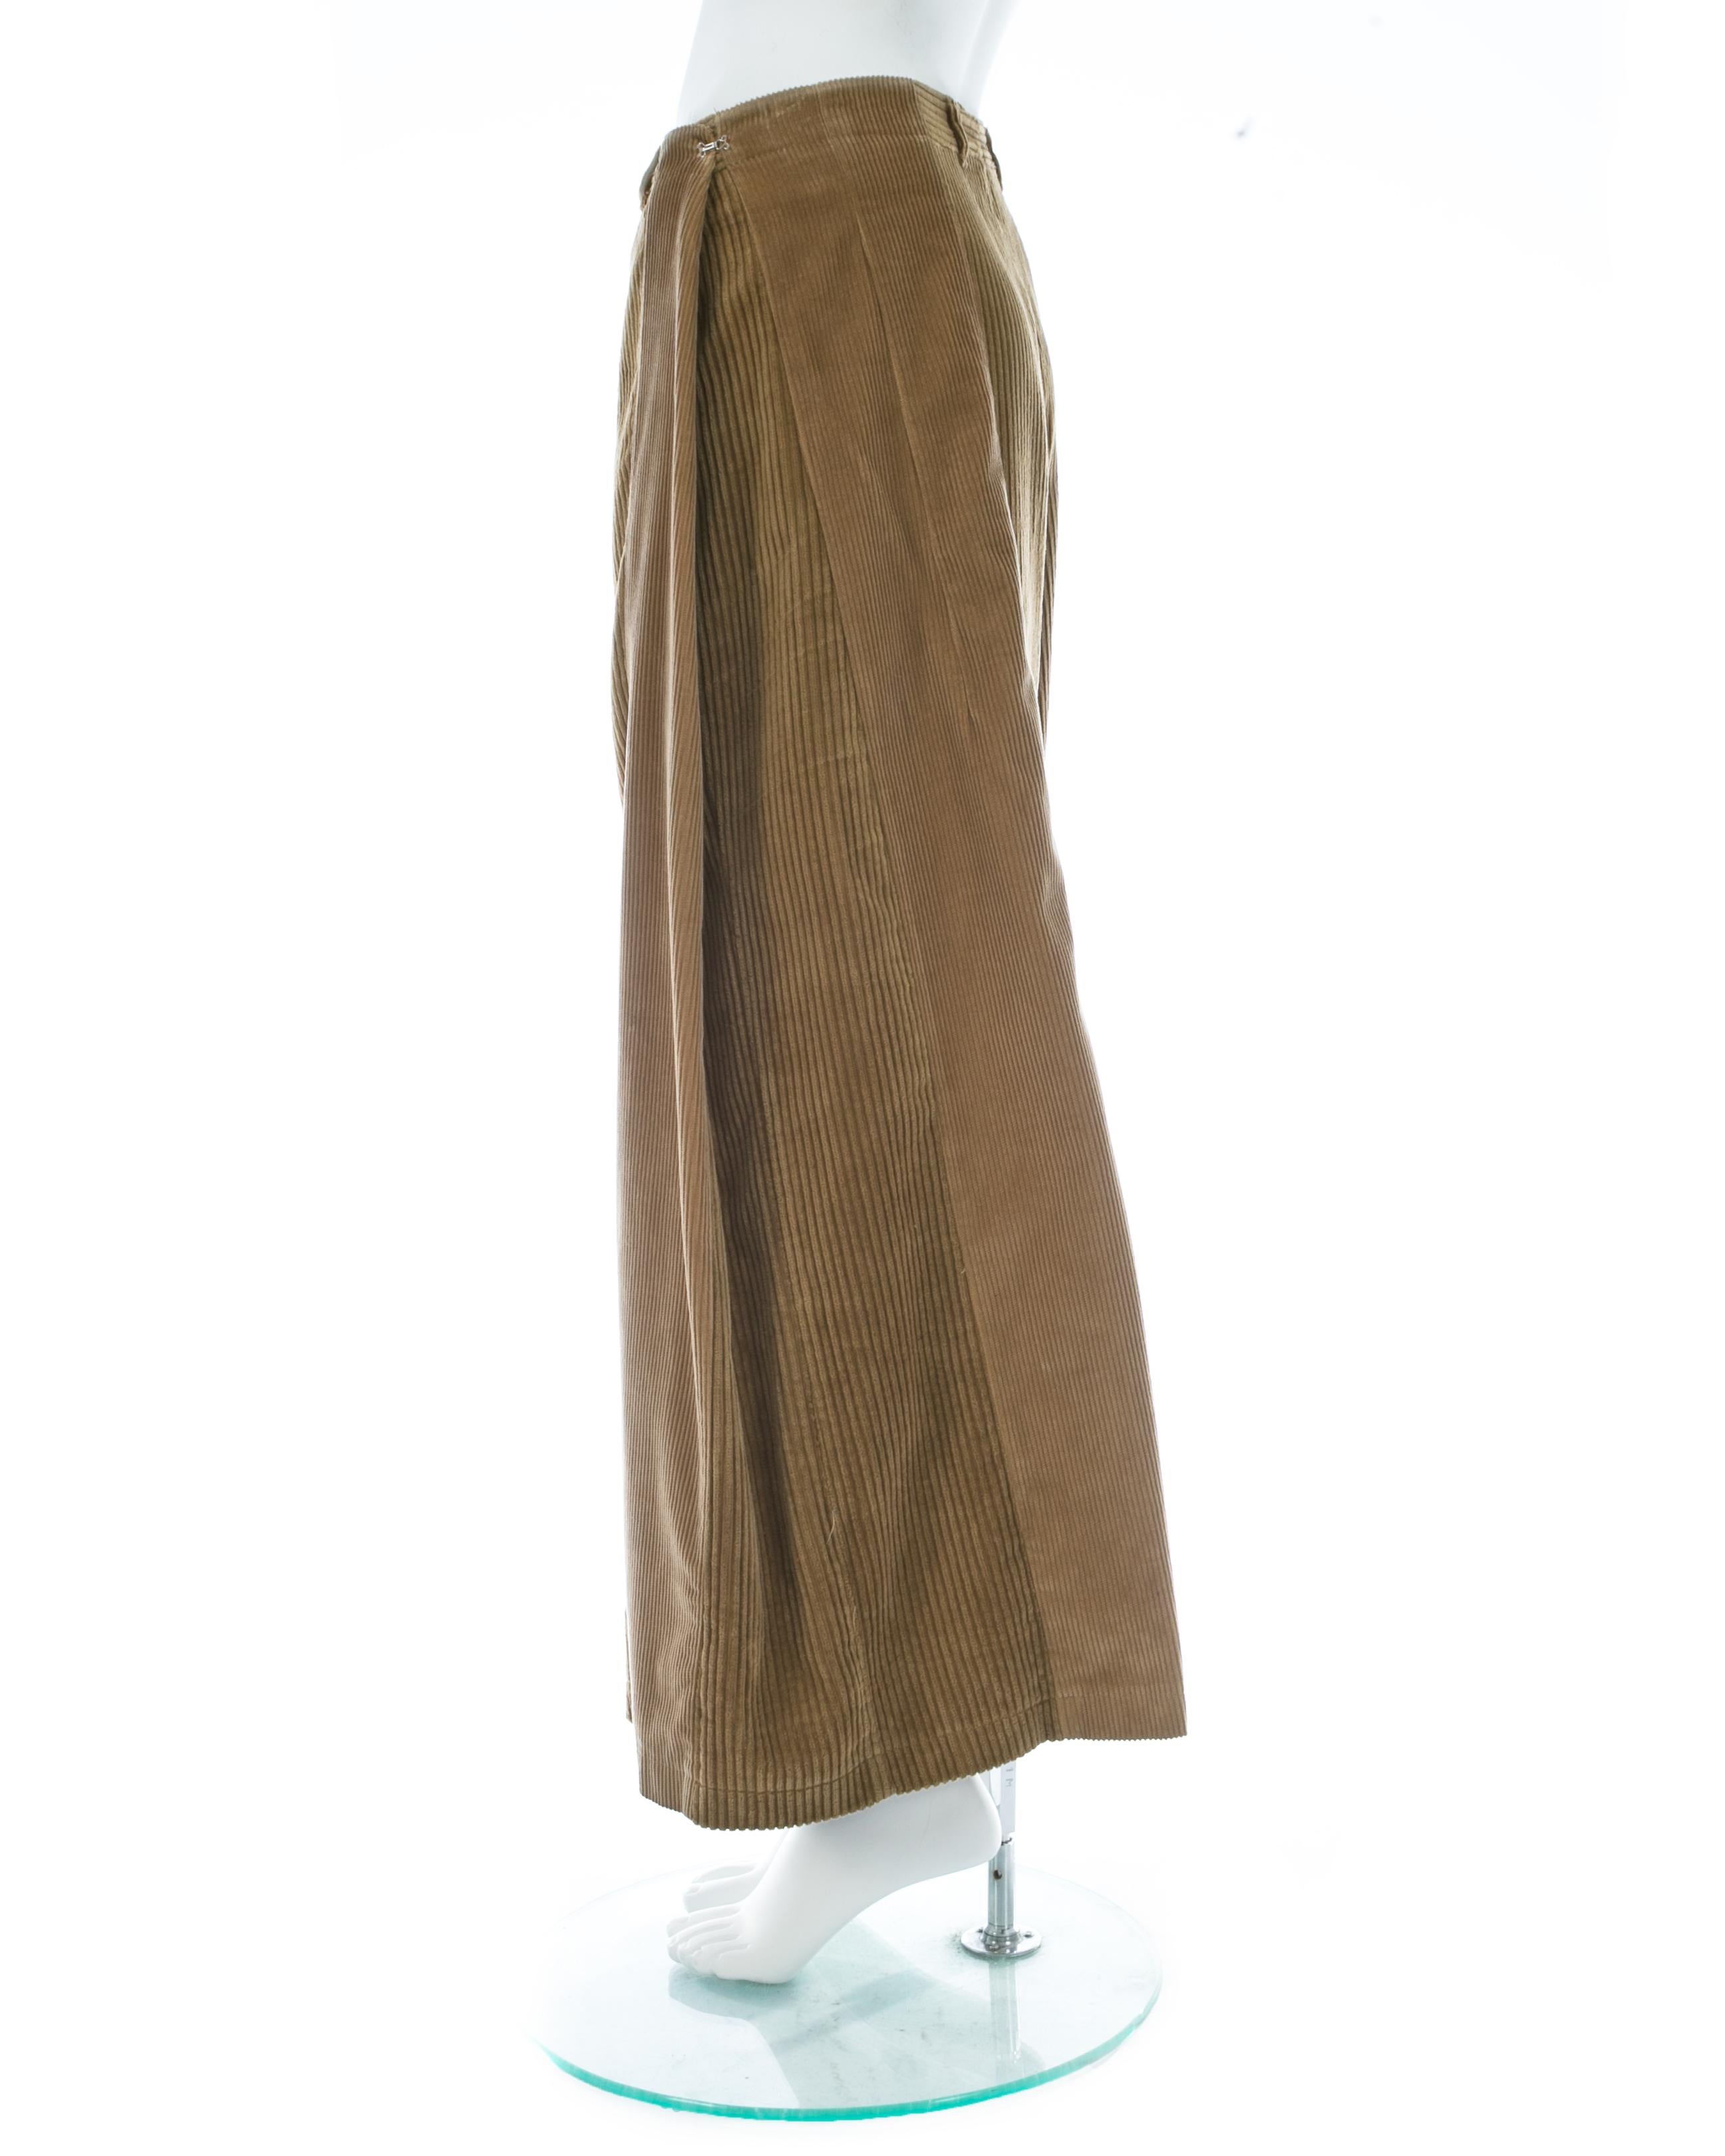 Martin Margiela artisanal tan corduroy reconstructed oversized pants, fw 2000 In Good Condition For Sale In London, London